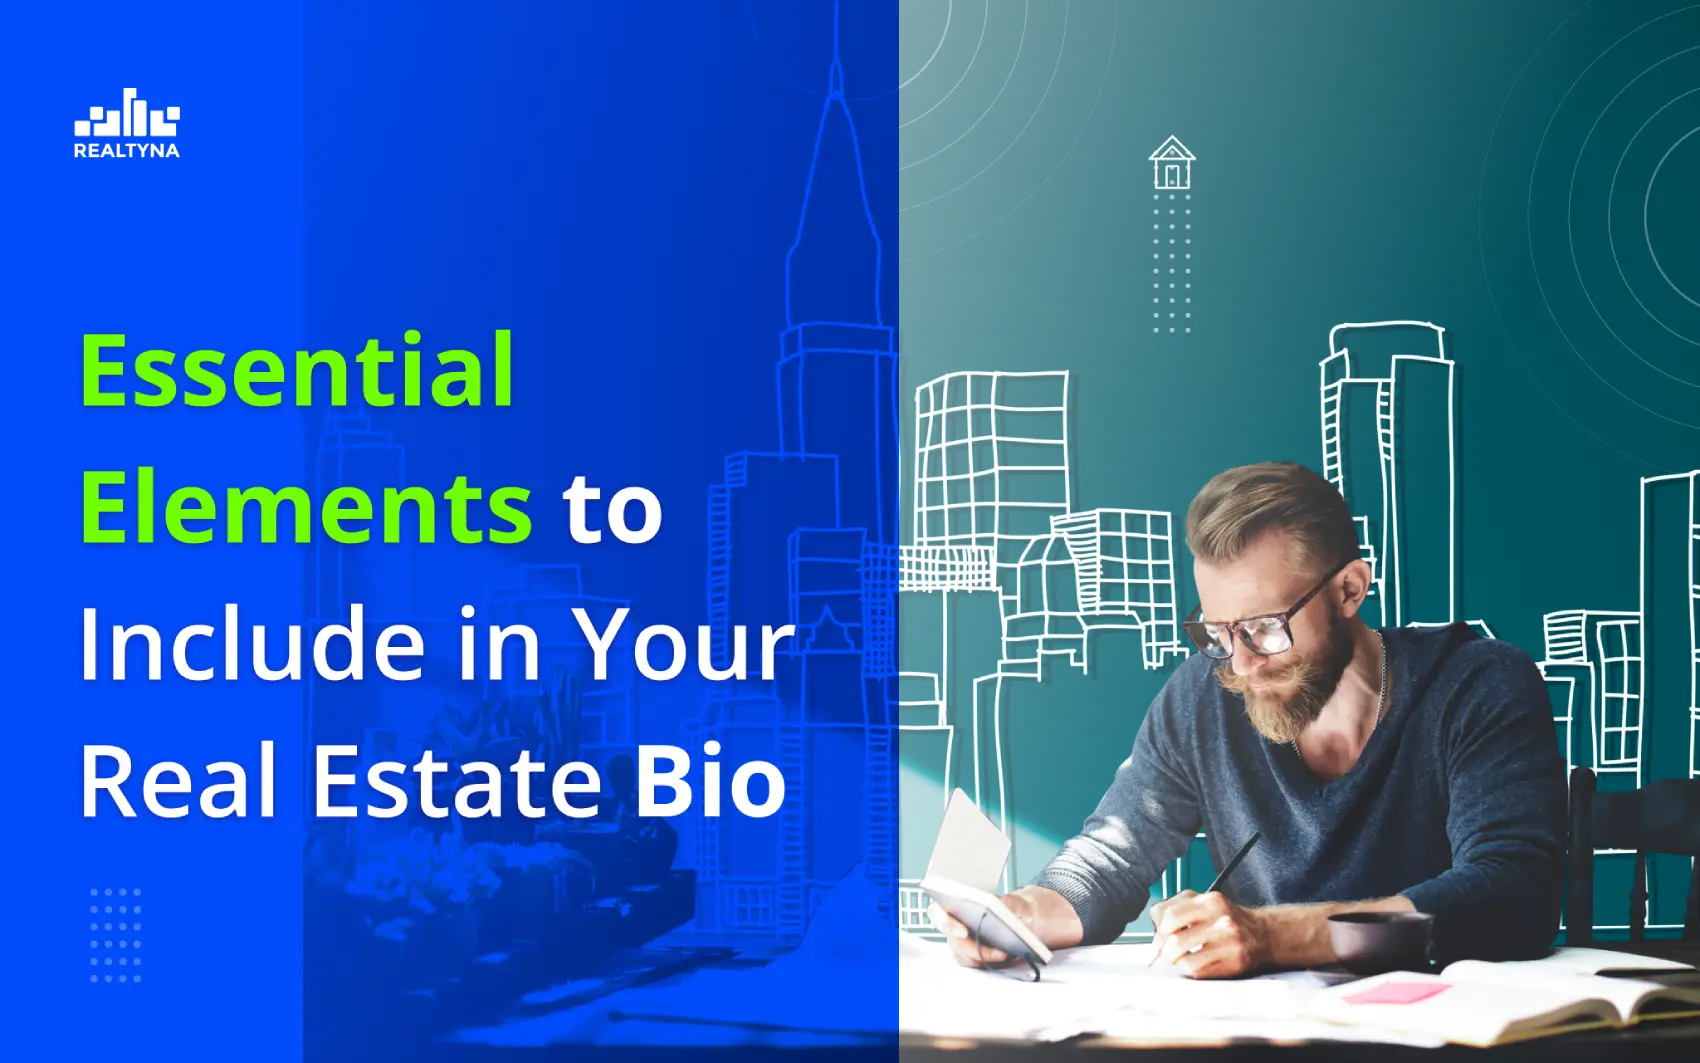 Essential Elements to Include in Your Real Estate Bio